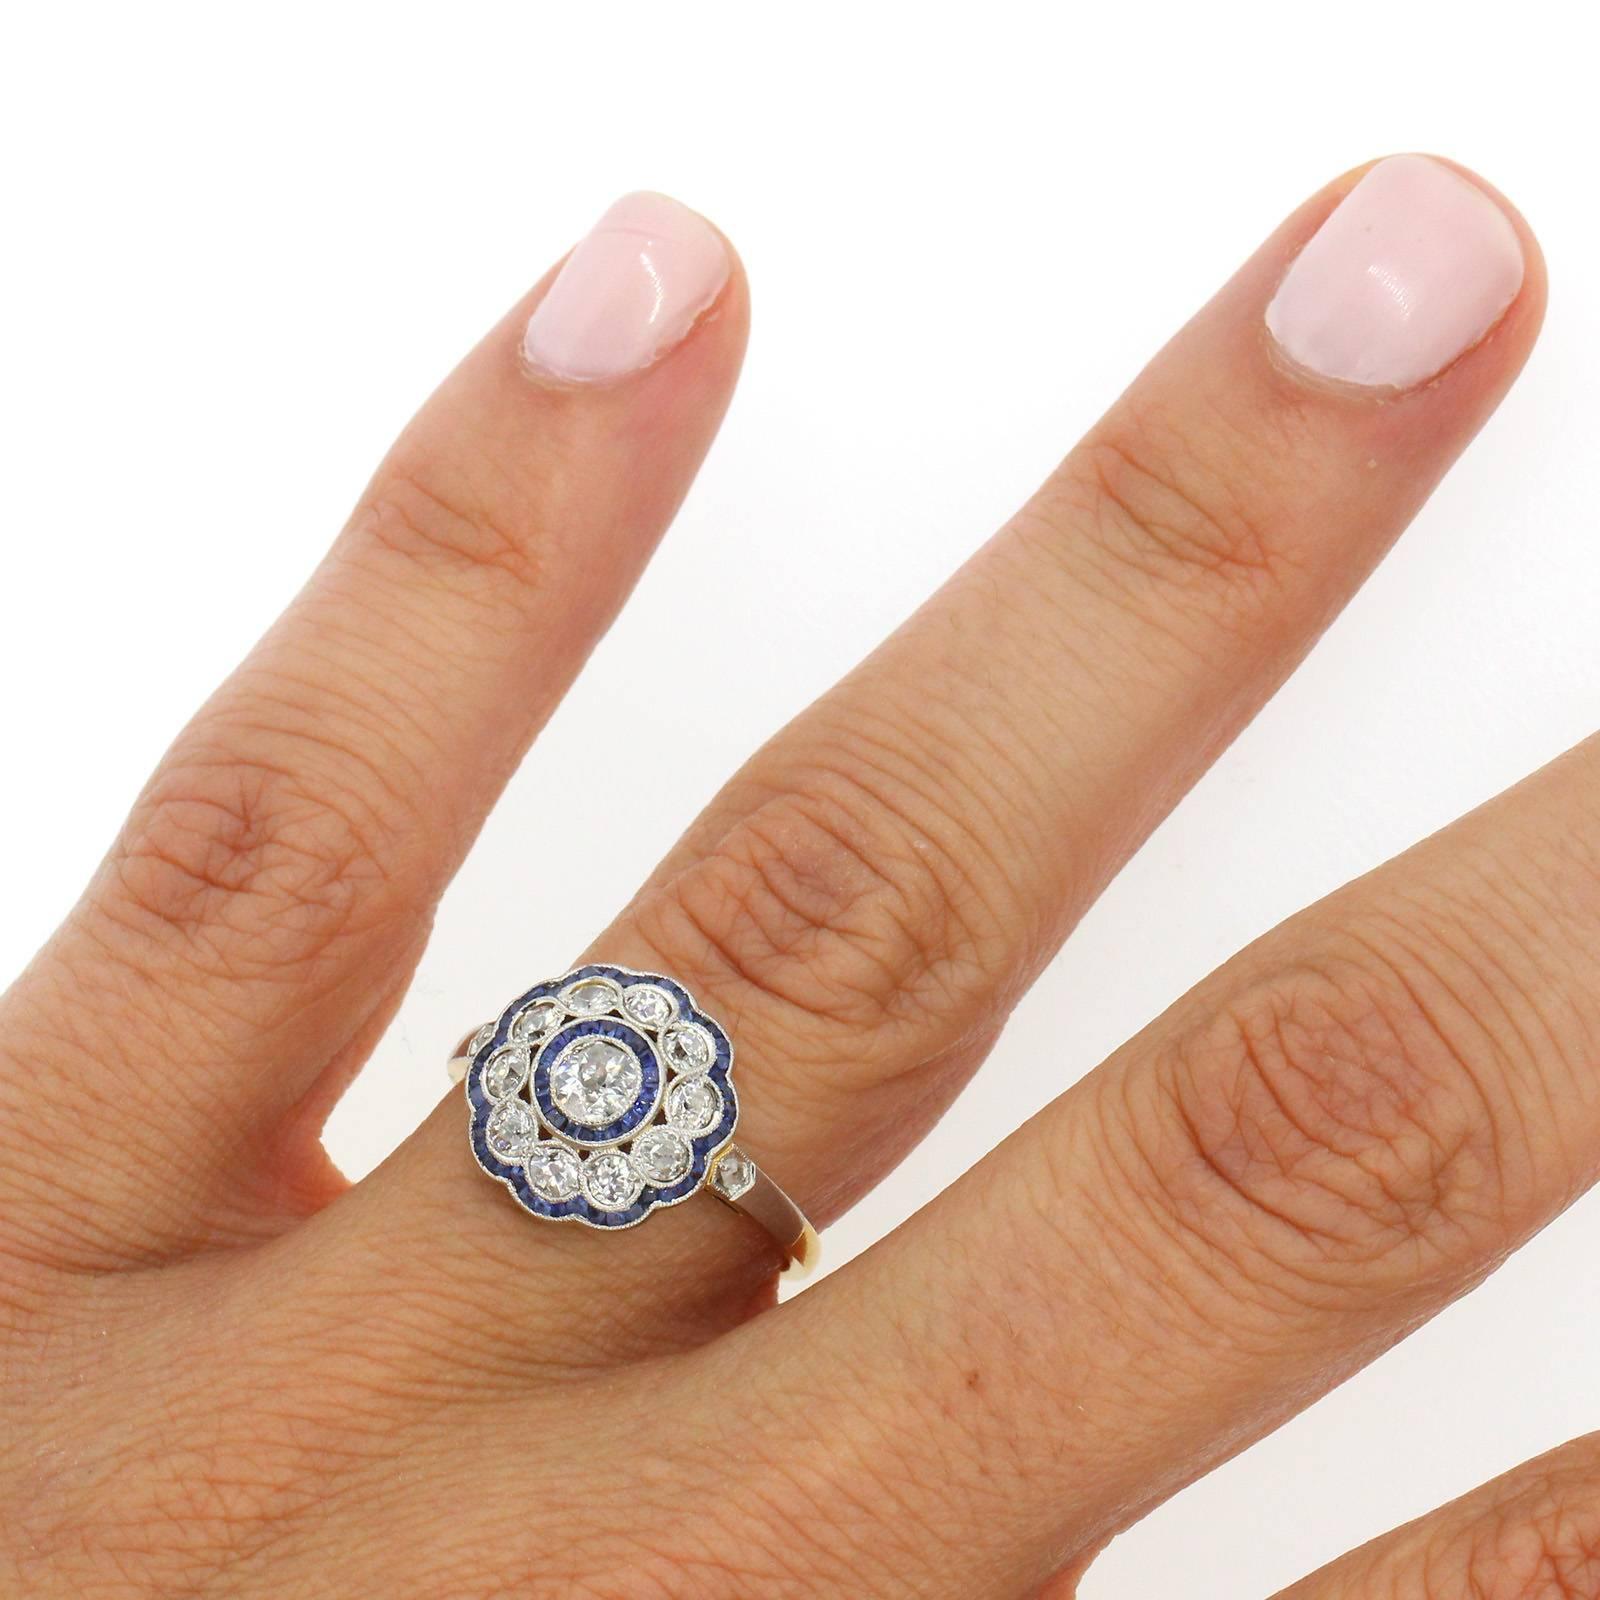 A vintage cluster design ring fabricated in platinum top and 18KT yellow gold centering an Old European Cut Diamond of approximate 0.30 carat.  The ring is accented with calibrated blue Ceylon Sapphires and ten Old Cut Diamonds.  The sides of the